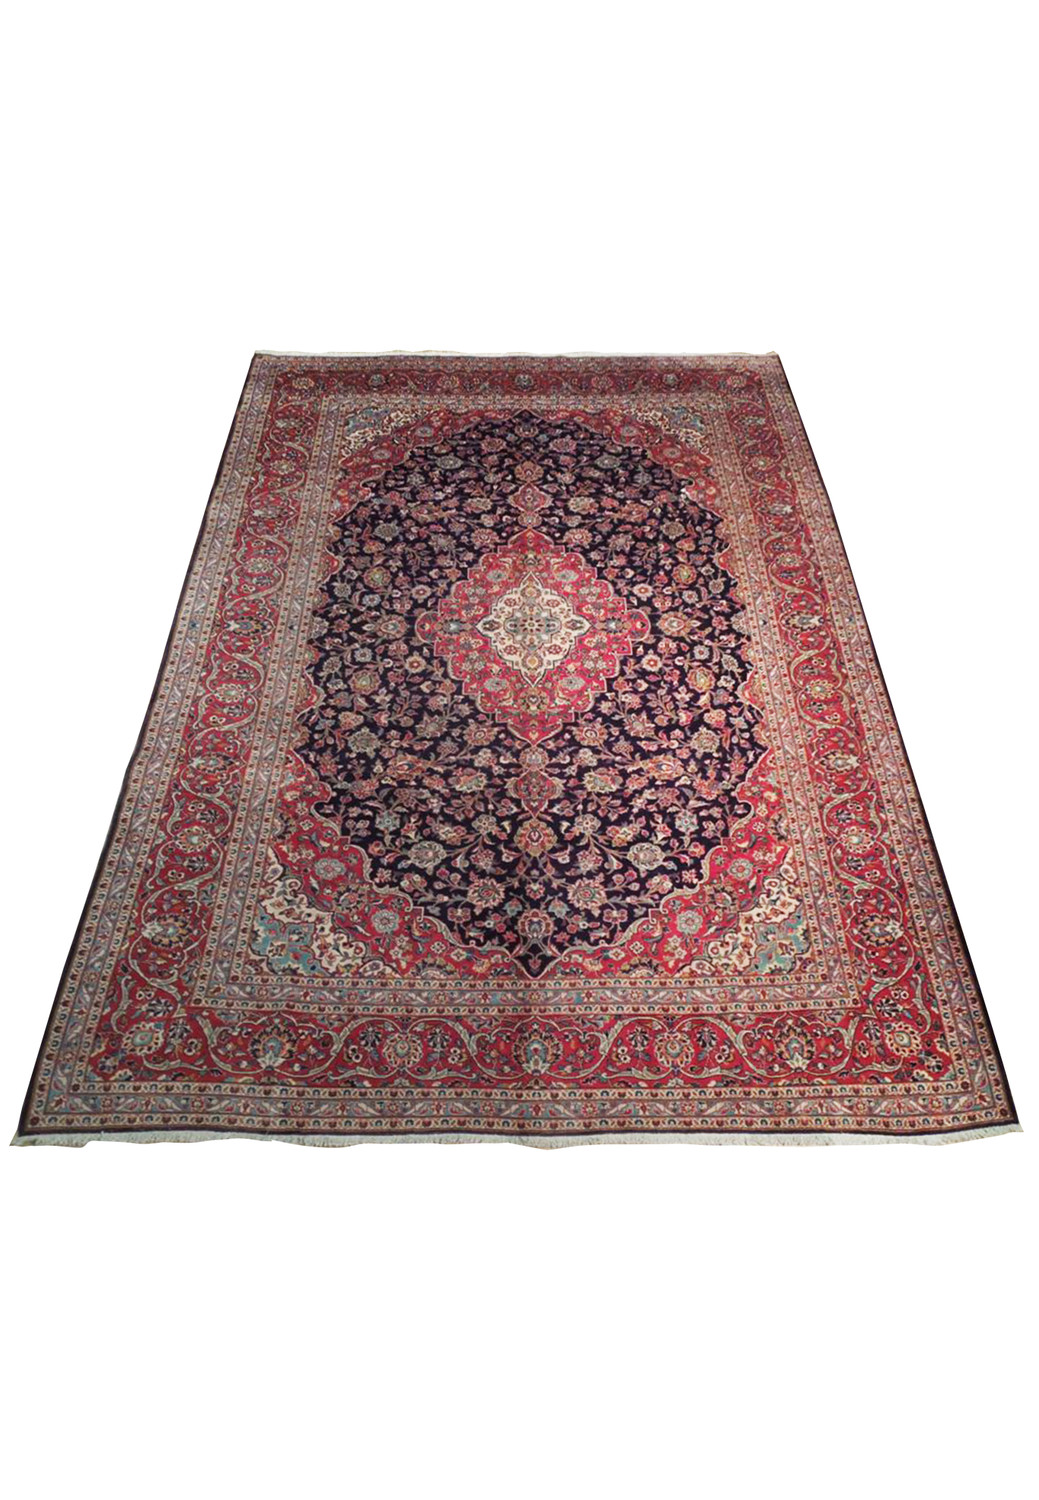 Authentic Handmade Persian Kashan rug with a detailed central medallion in red and blue floral motifs on a luxurious wool fabric, size 10x13.5 feet.